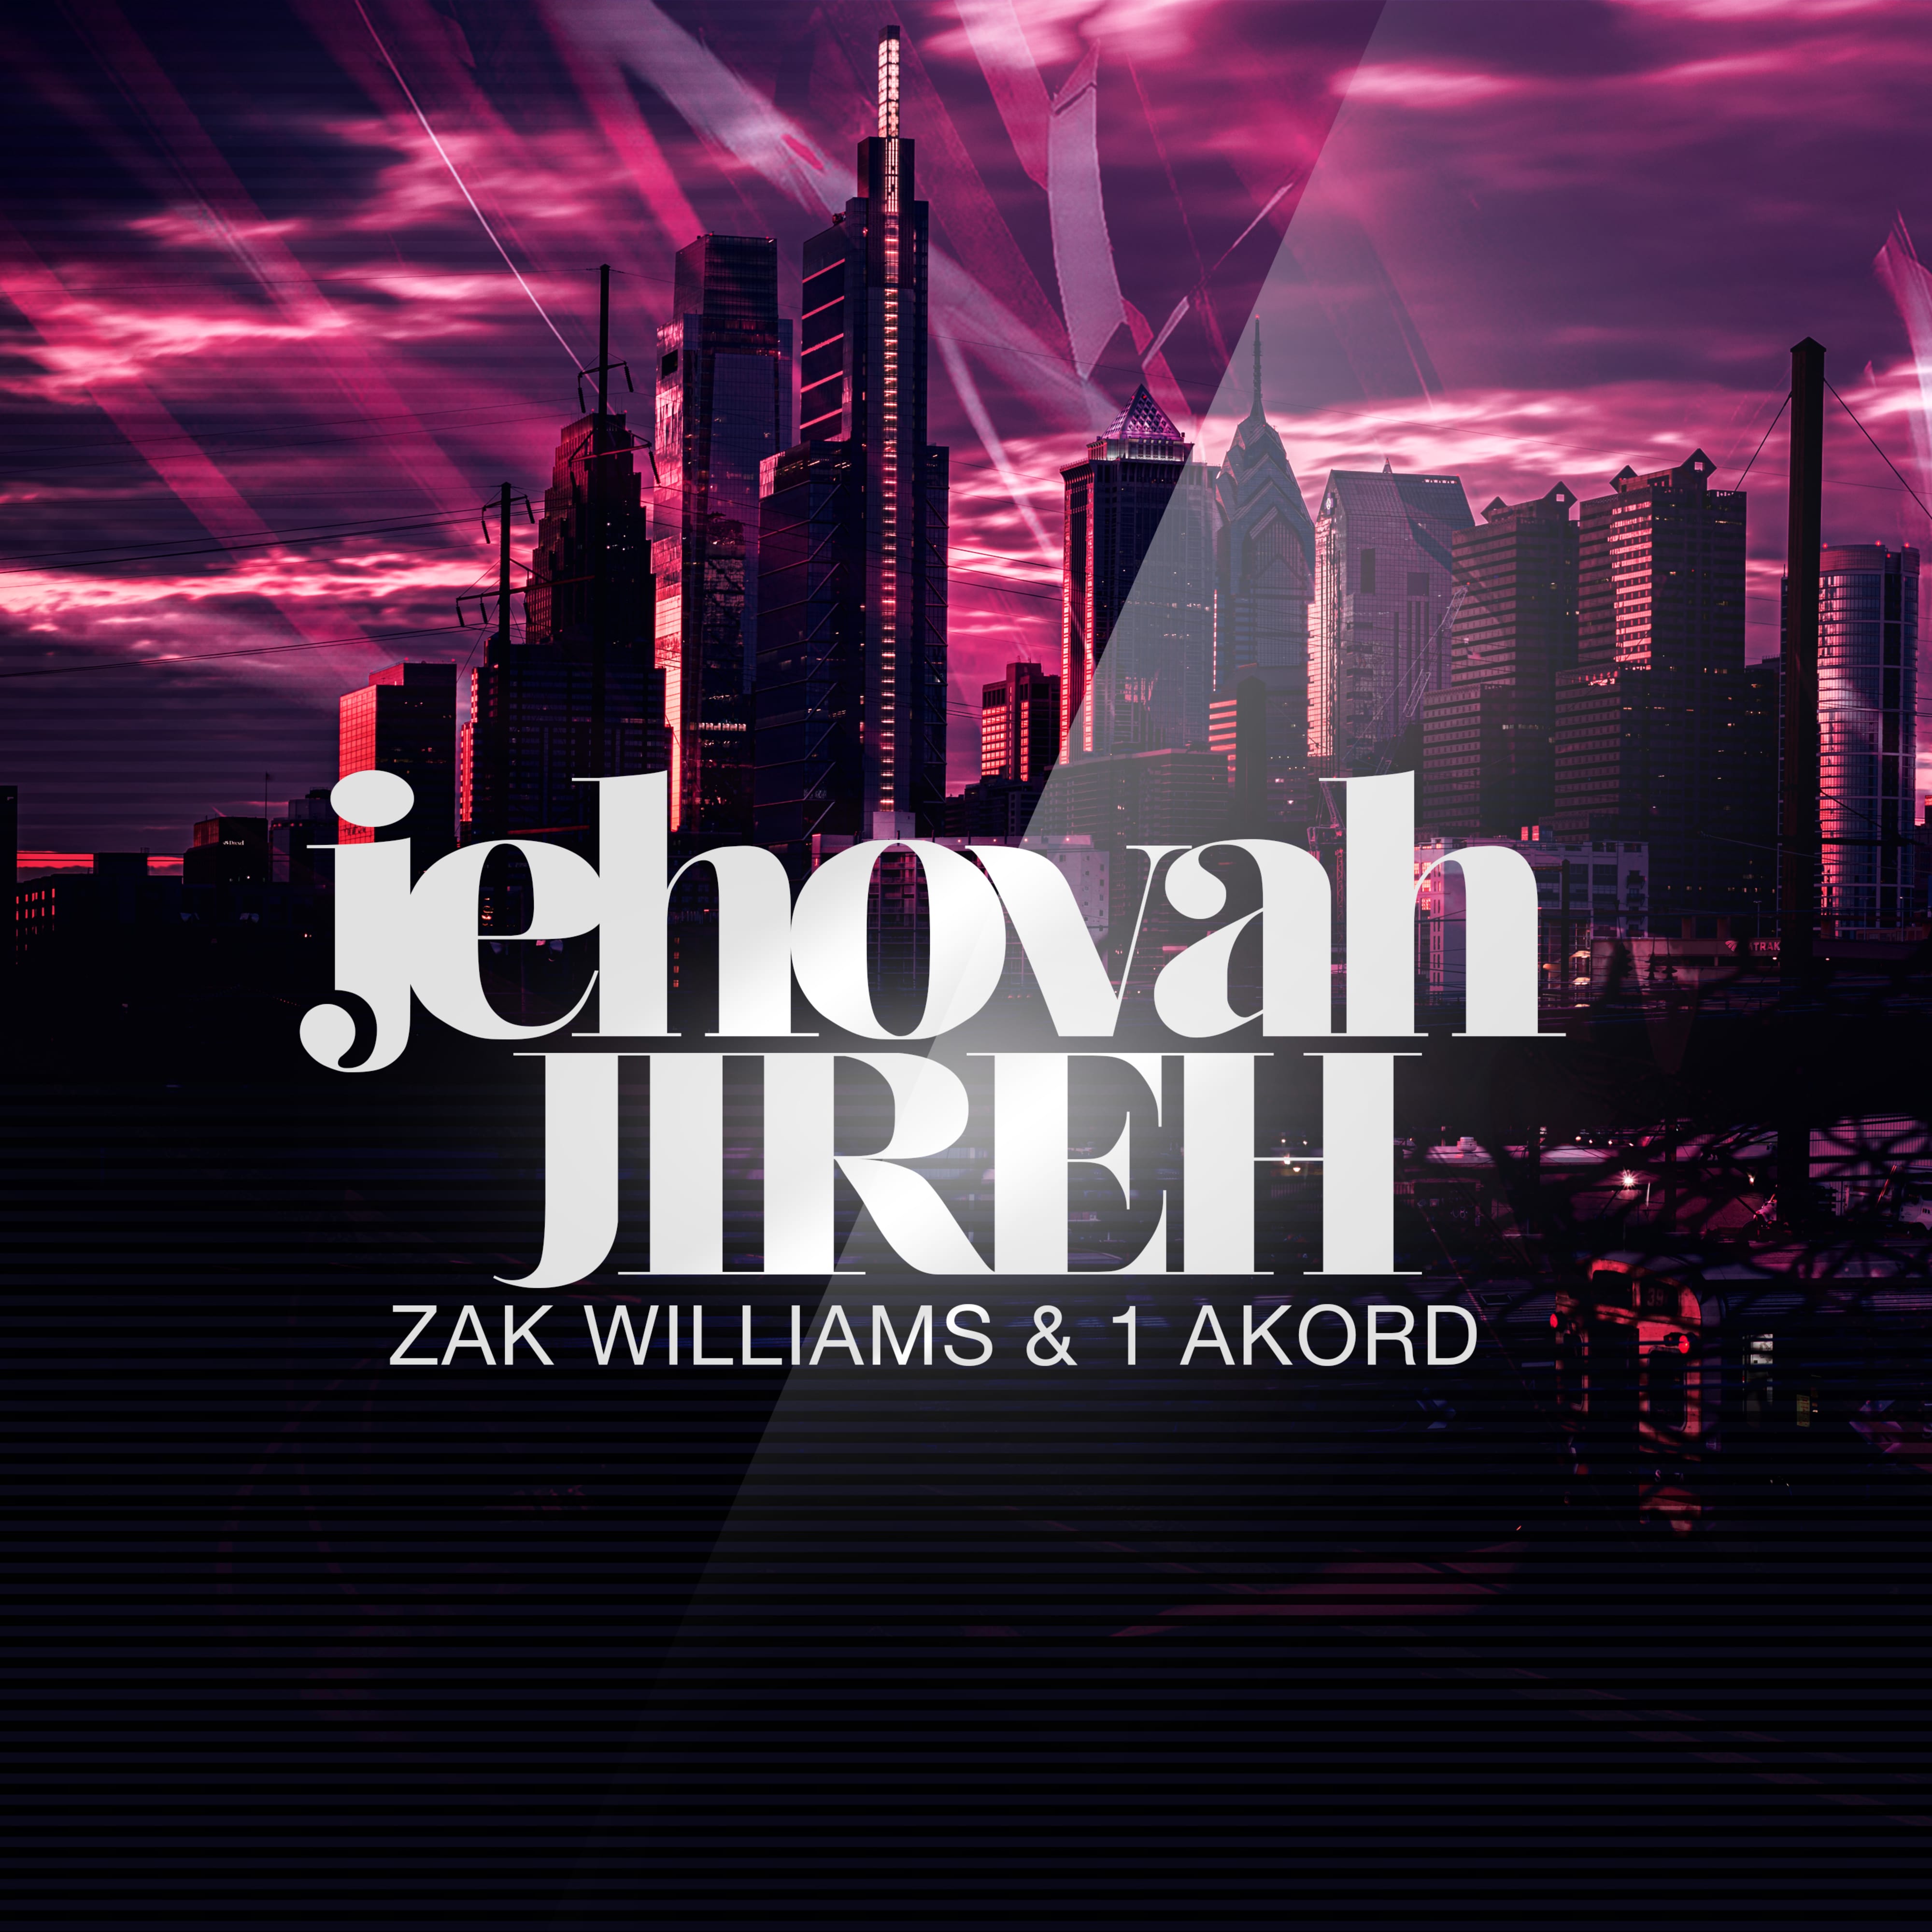 Art for Jehovah Jireh by Zak Williams & 1Akord 